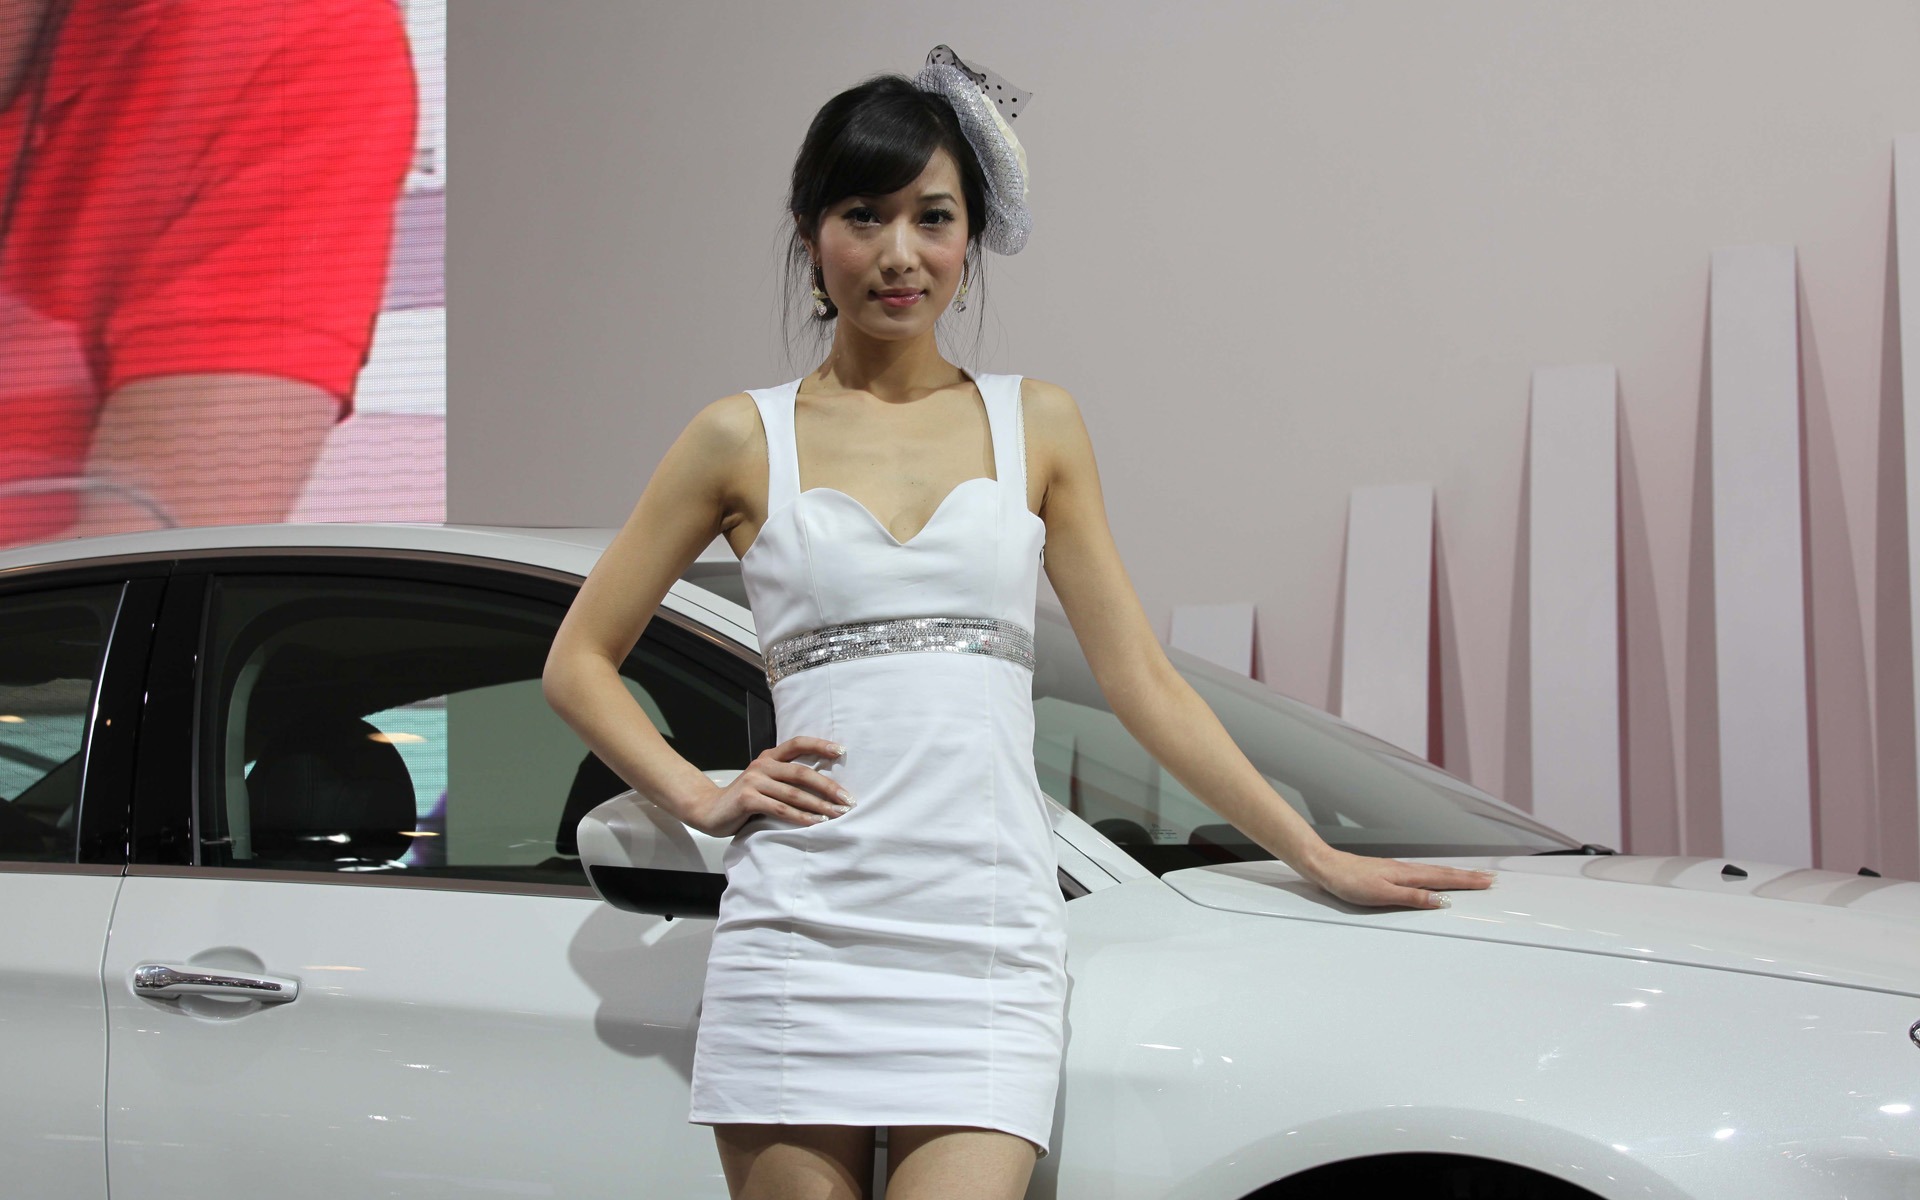 2010 Beijing International Auto Show beauty (2) (the wind chasing the clouds works) #33 - 1920x1200